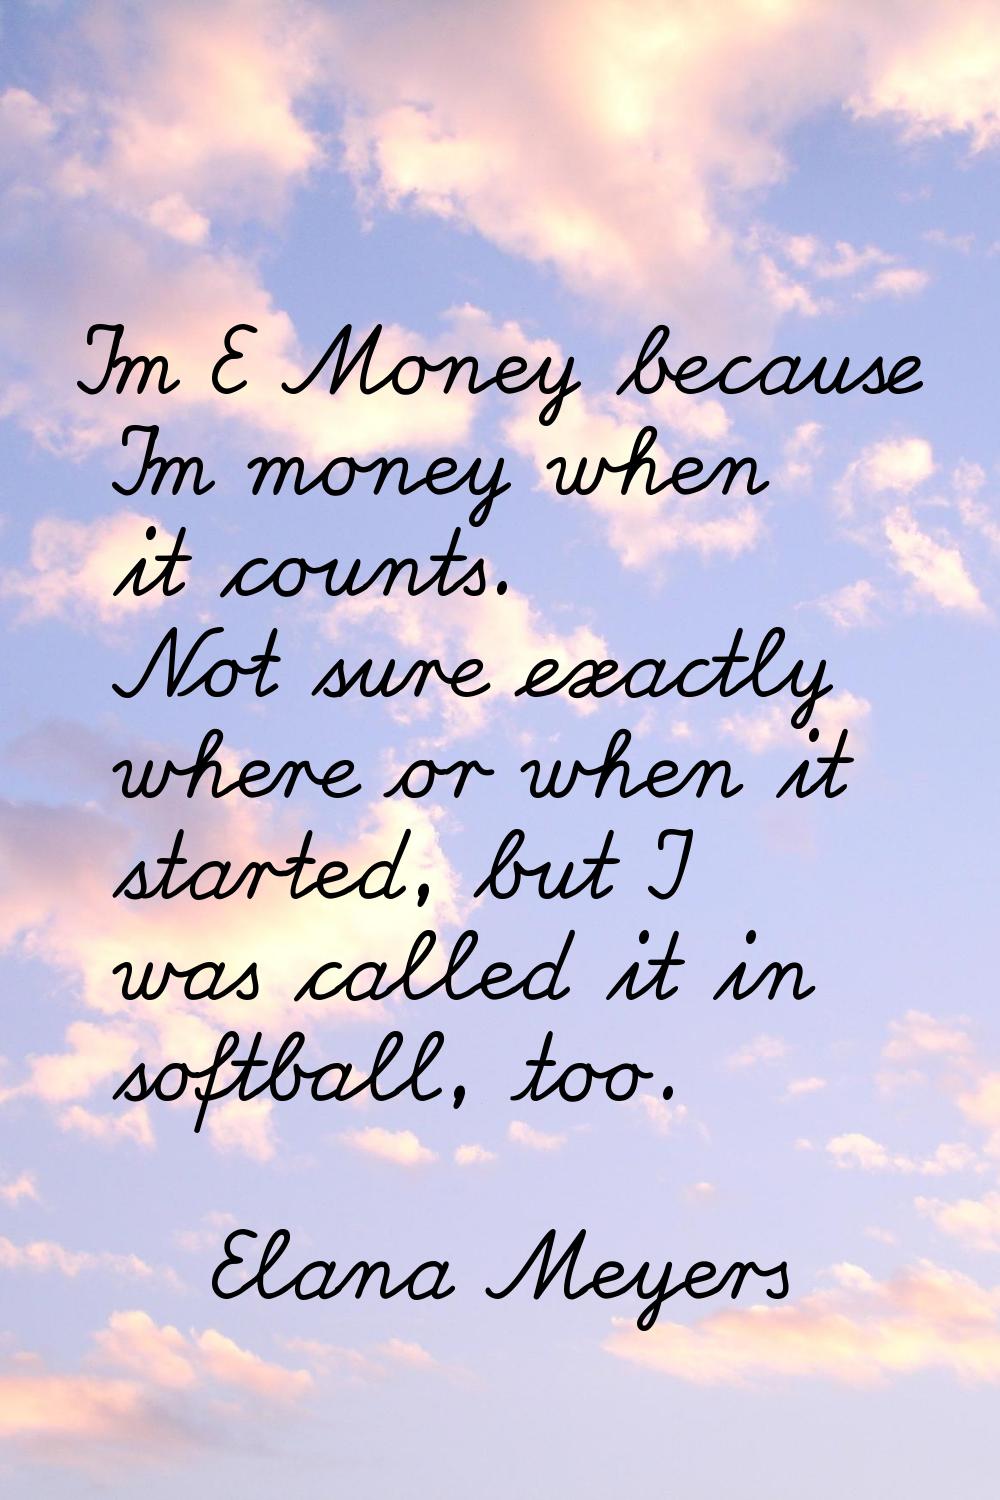 I'm E Money because I'm money when it counts. Not sure exactly where or when it started, but I was 